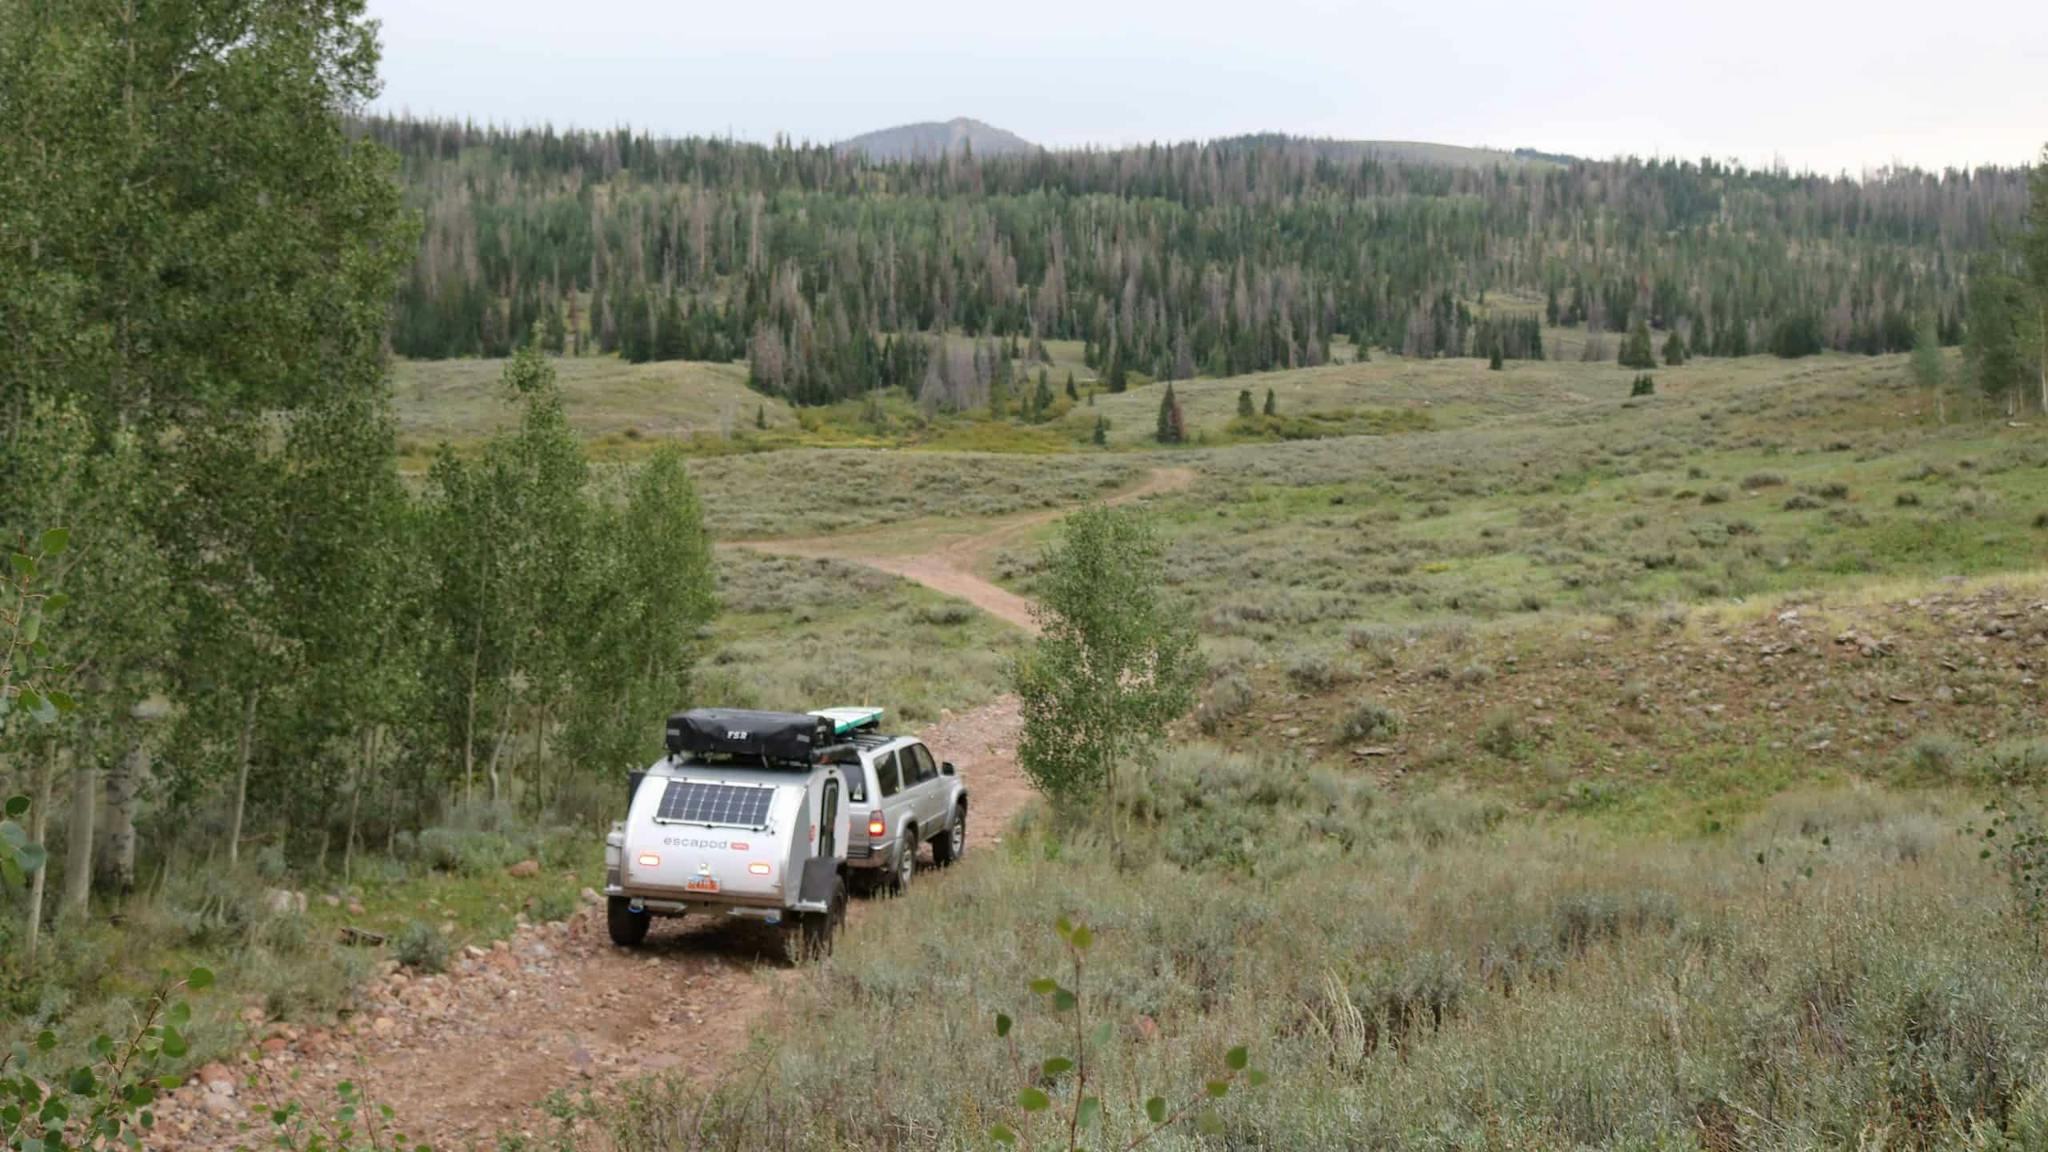 A teardrop camper being towed by a grey Toyota through a trail in the mountains.